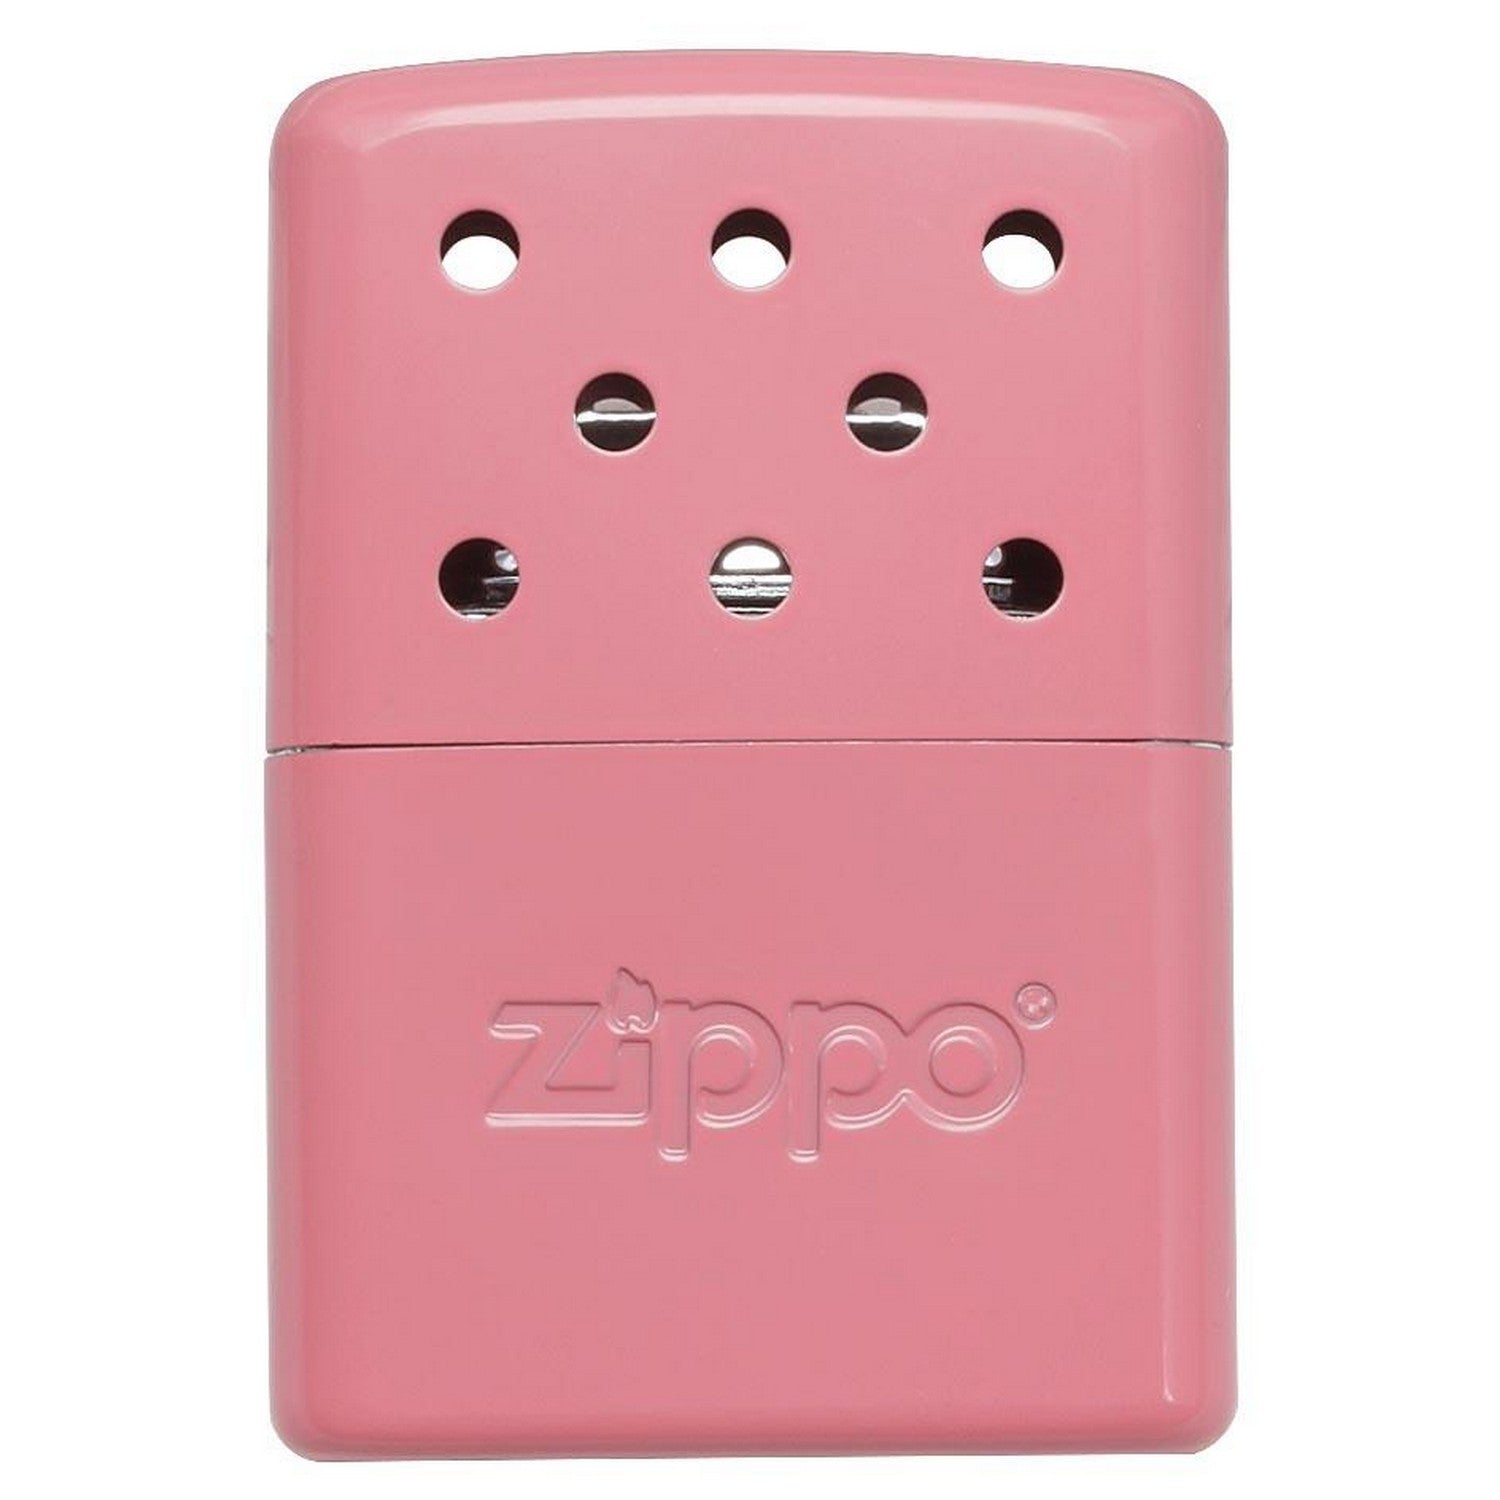 Zippo 6 Hour Catalytic Refillable Metal Compact Pink Hand Warmer